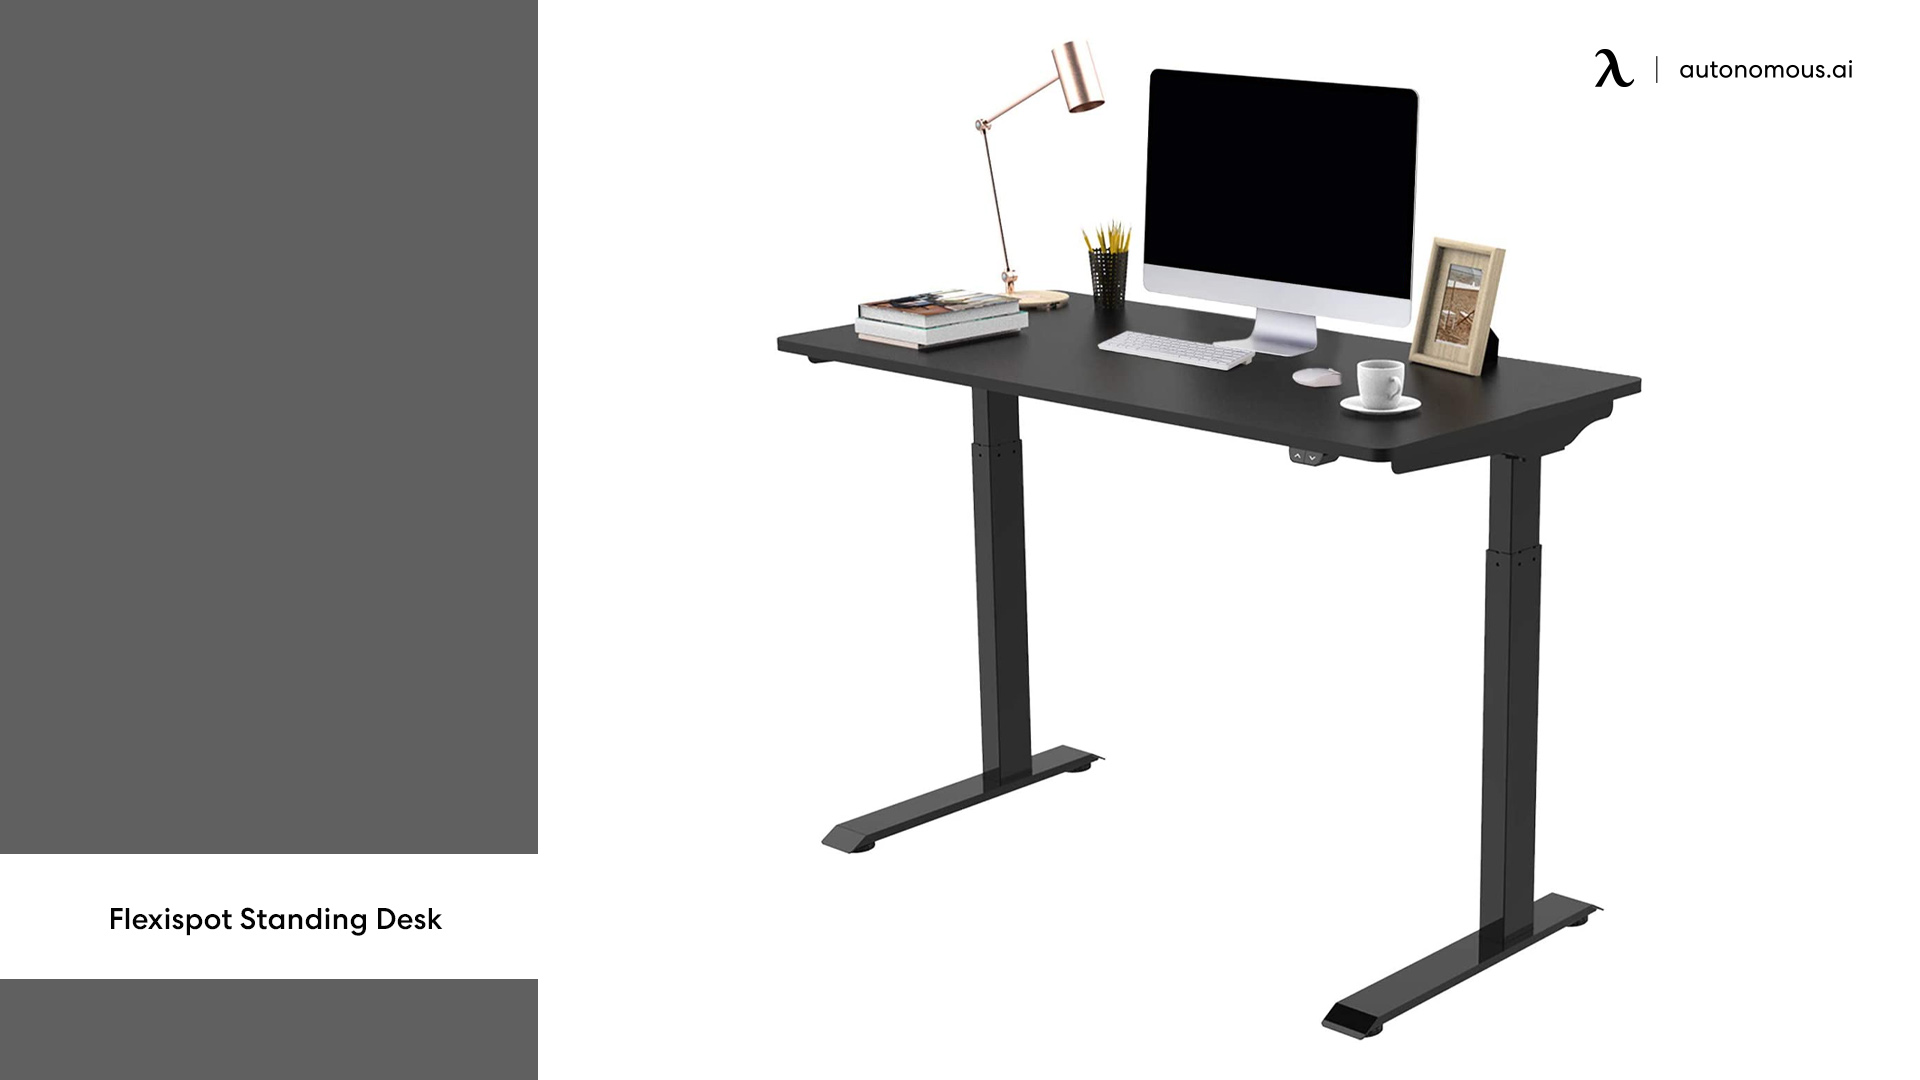 Flexispot Standing Desk for tall people